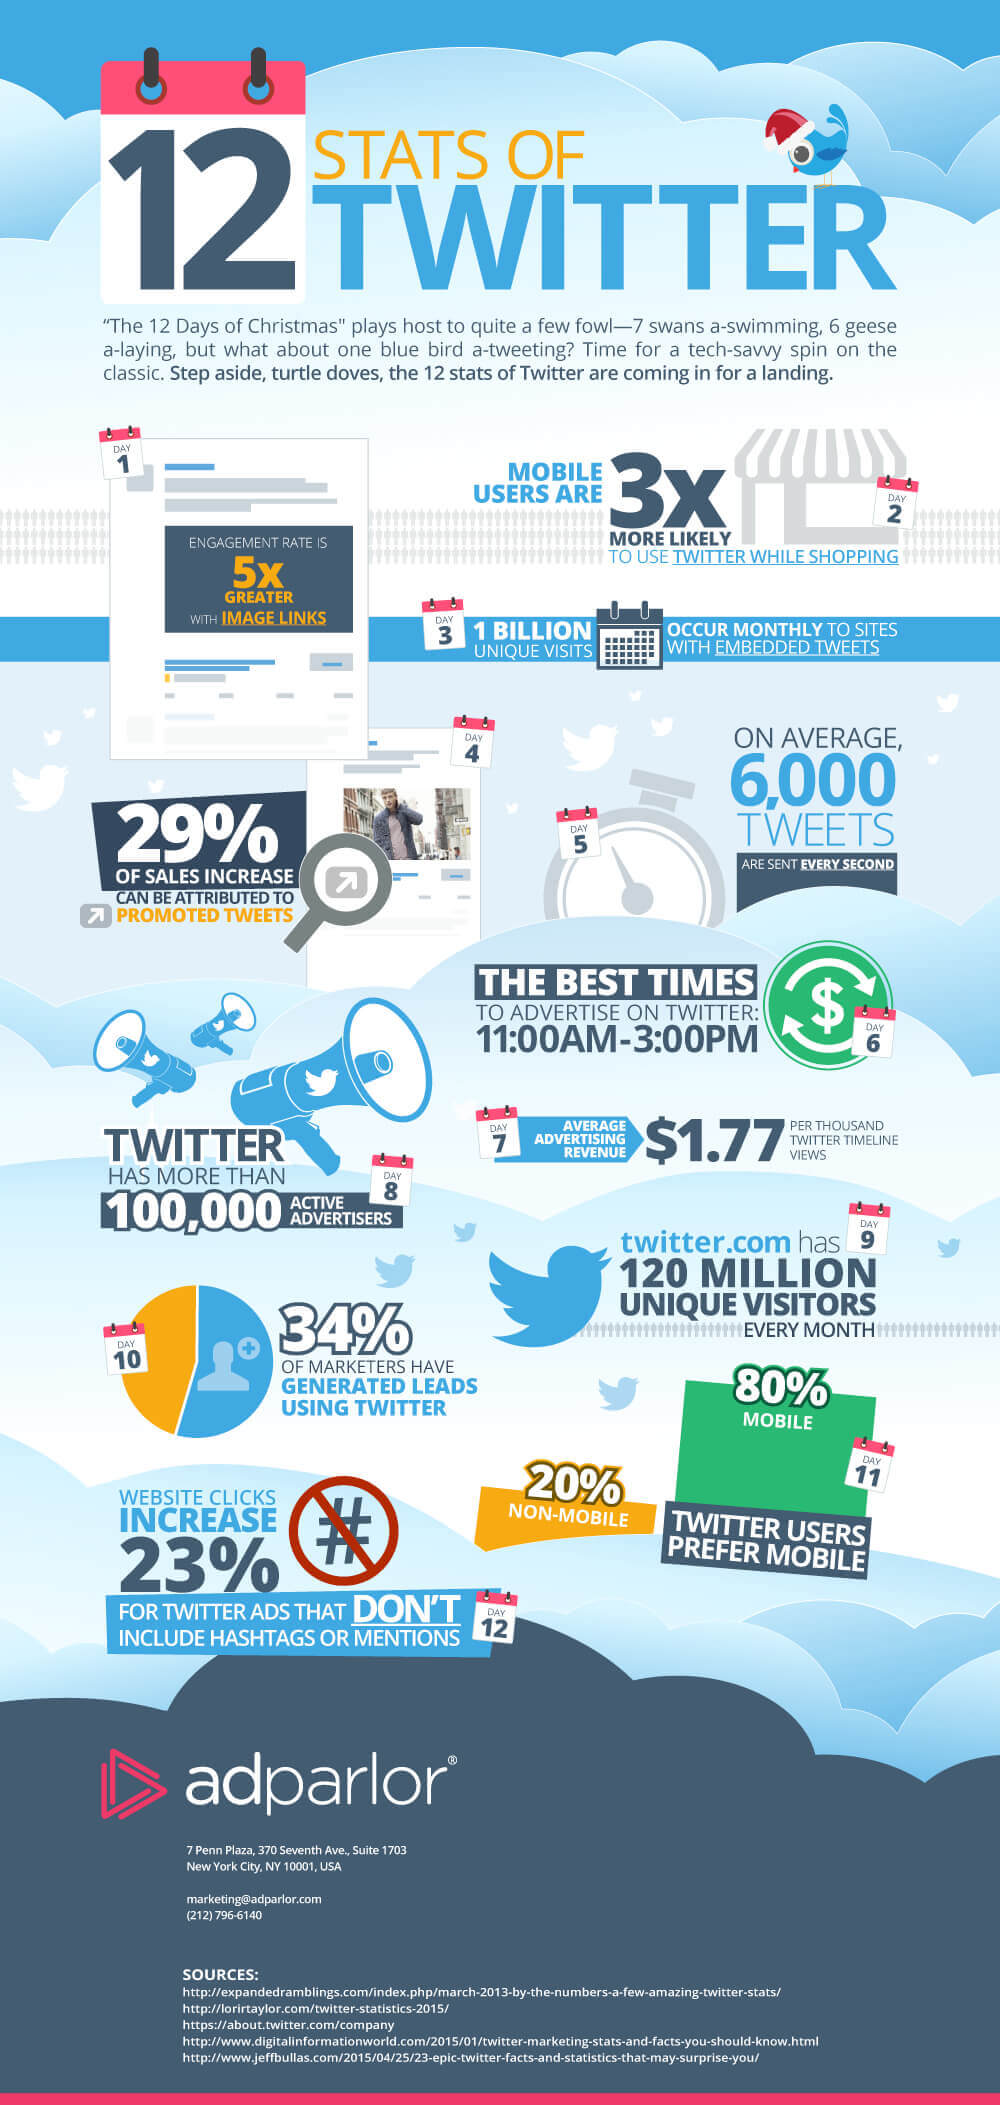 AdParlor Infographic: Blue Bird A-Tweeting: The Twitter Infographic